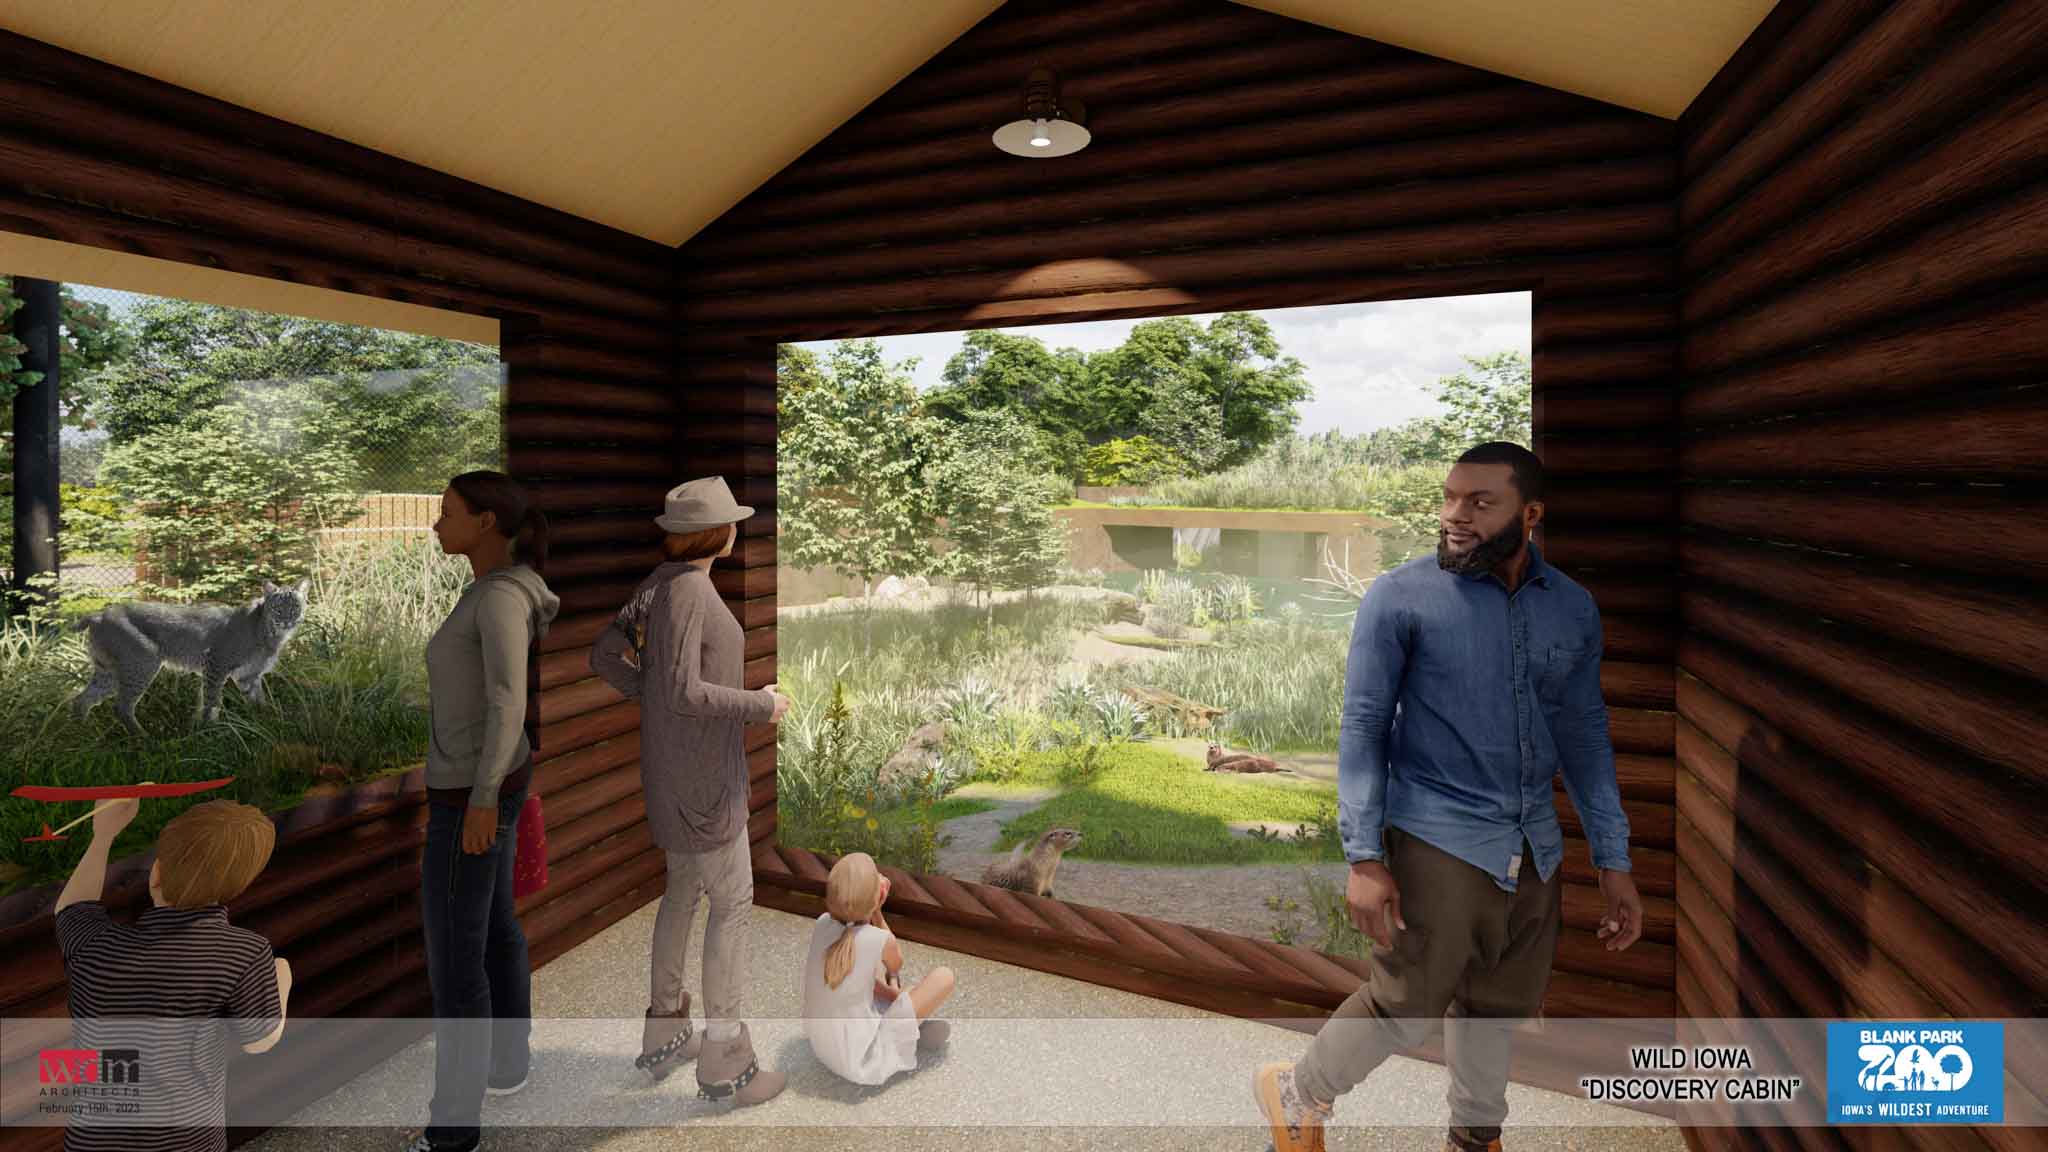 Rendering of guests inside a cabin with floor to ceiling length glass viewing windows of the otter habitat and bobcat habitat